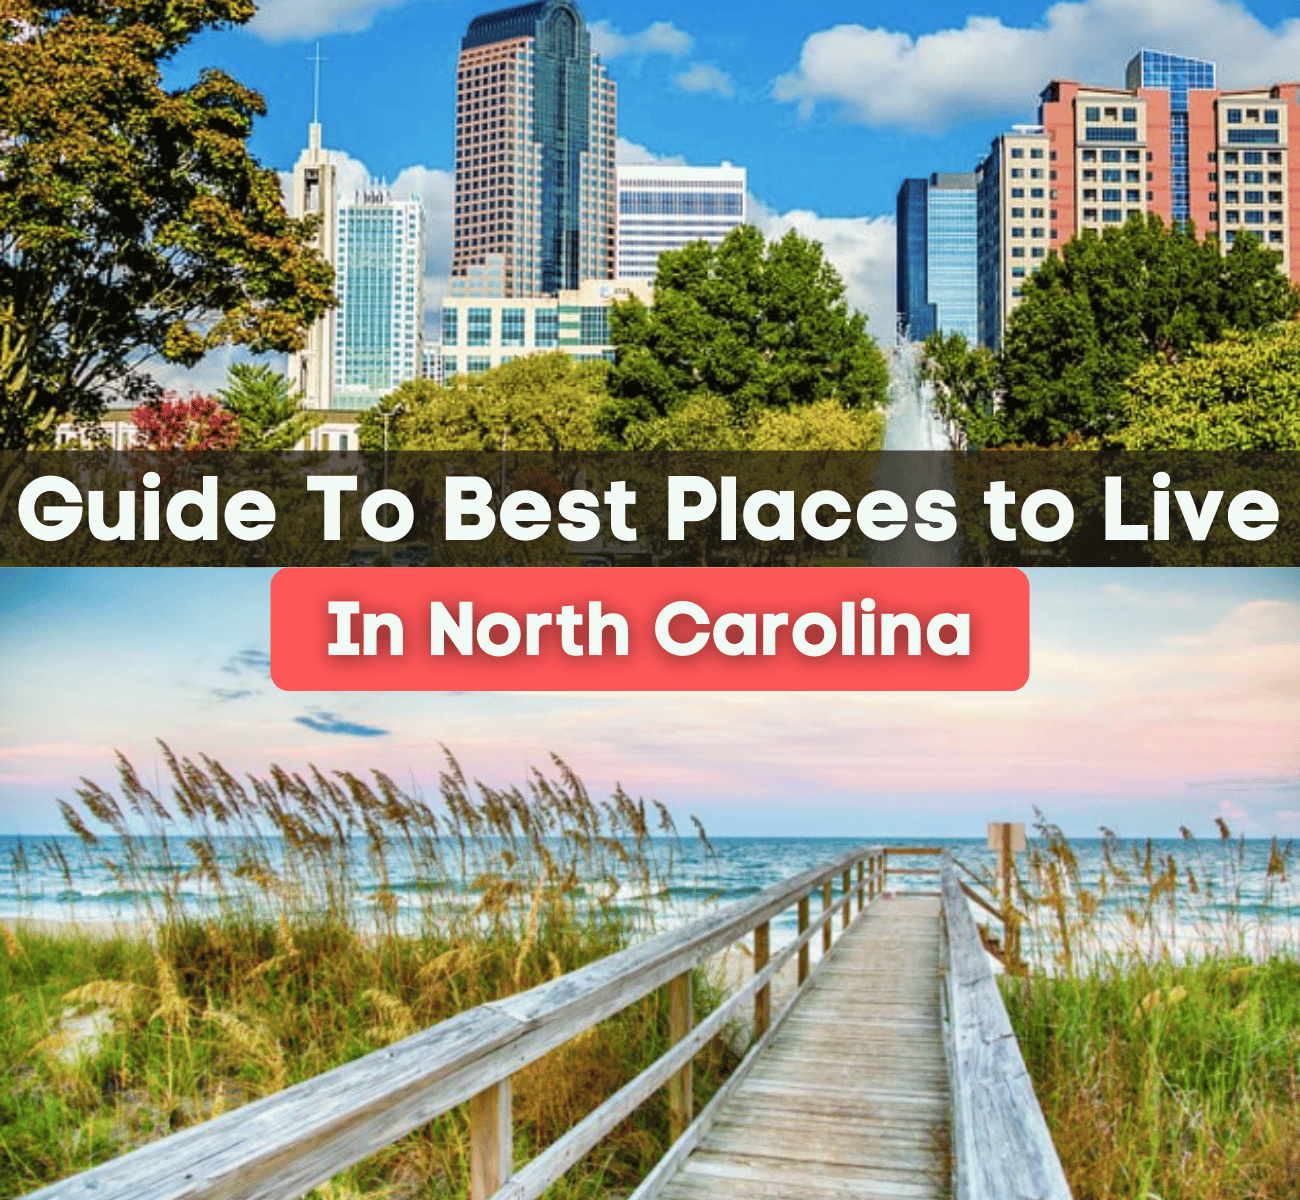 Guide to Best Places to Live in North Carolina